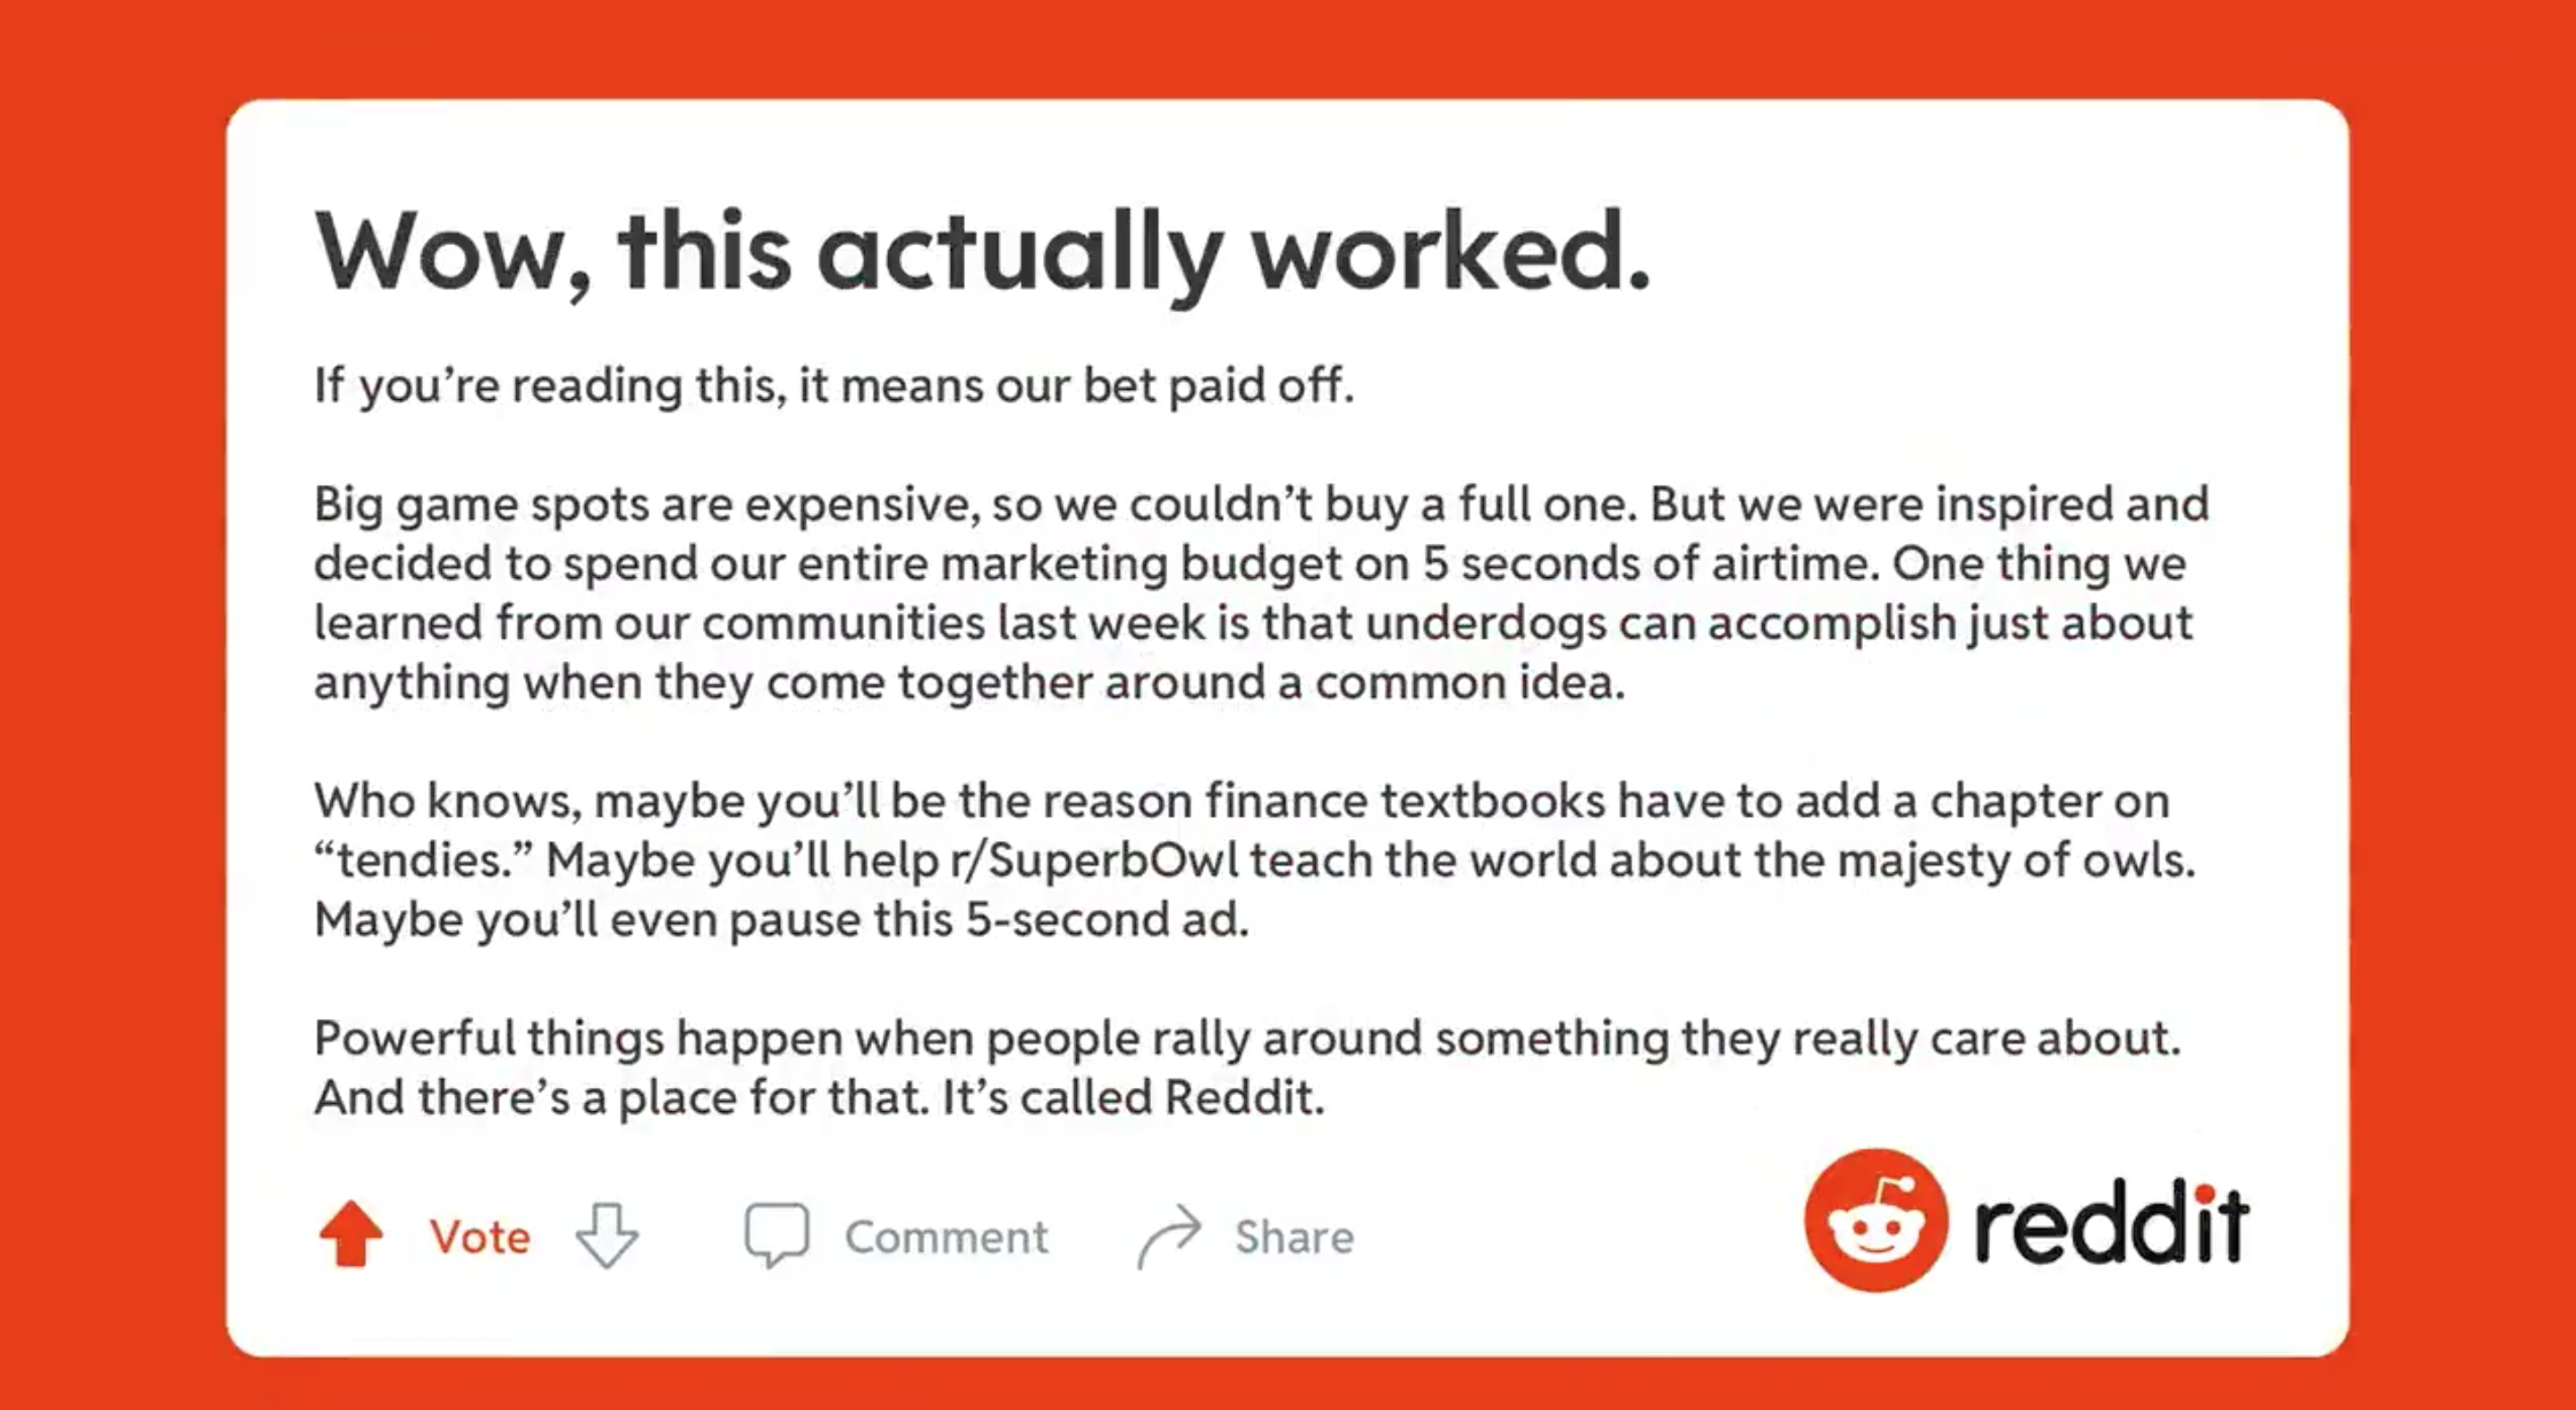 Reddit bought a 5-second Super Bowl ad honoring 'underdogs' involved in GameStop trading frenzy